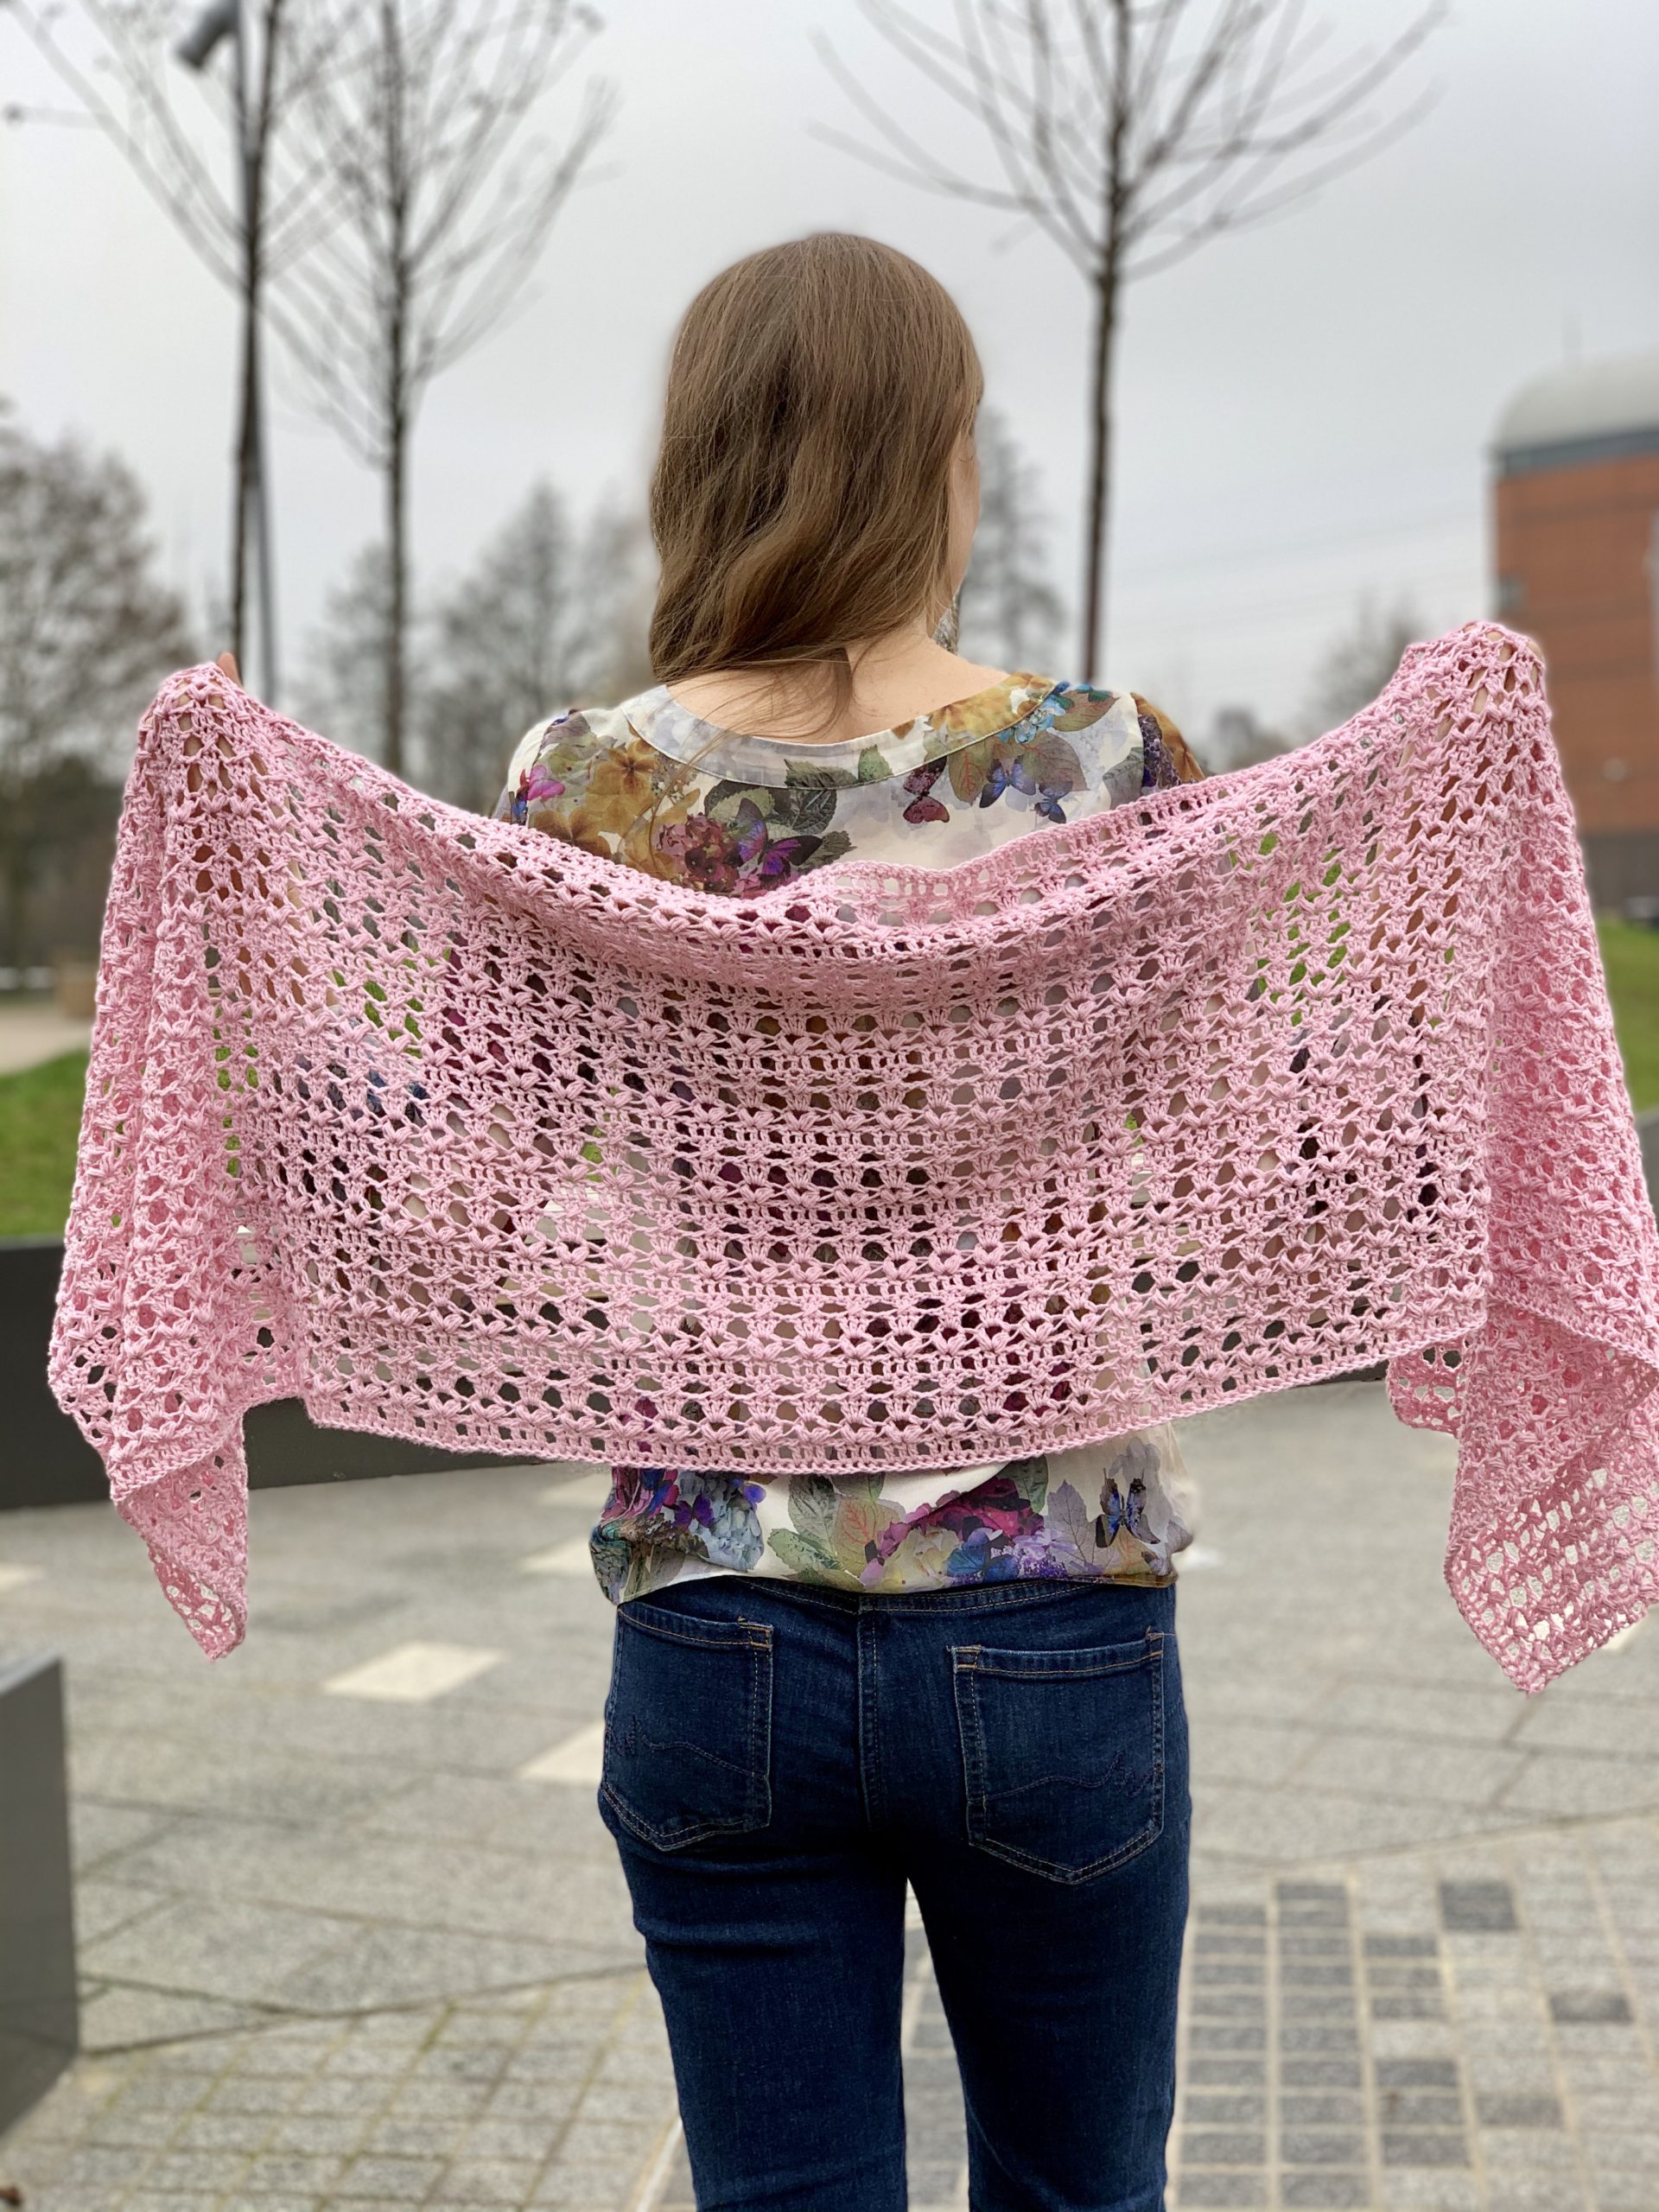 https://exquisitecrochetuk.com/wp-content/uploads/2020/08/holding-shawl-at-the-back-building-scaled.jpg